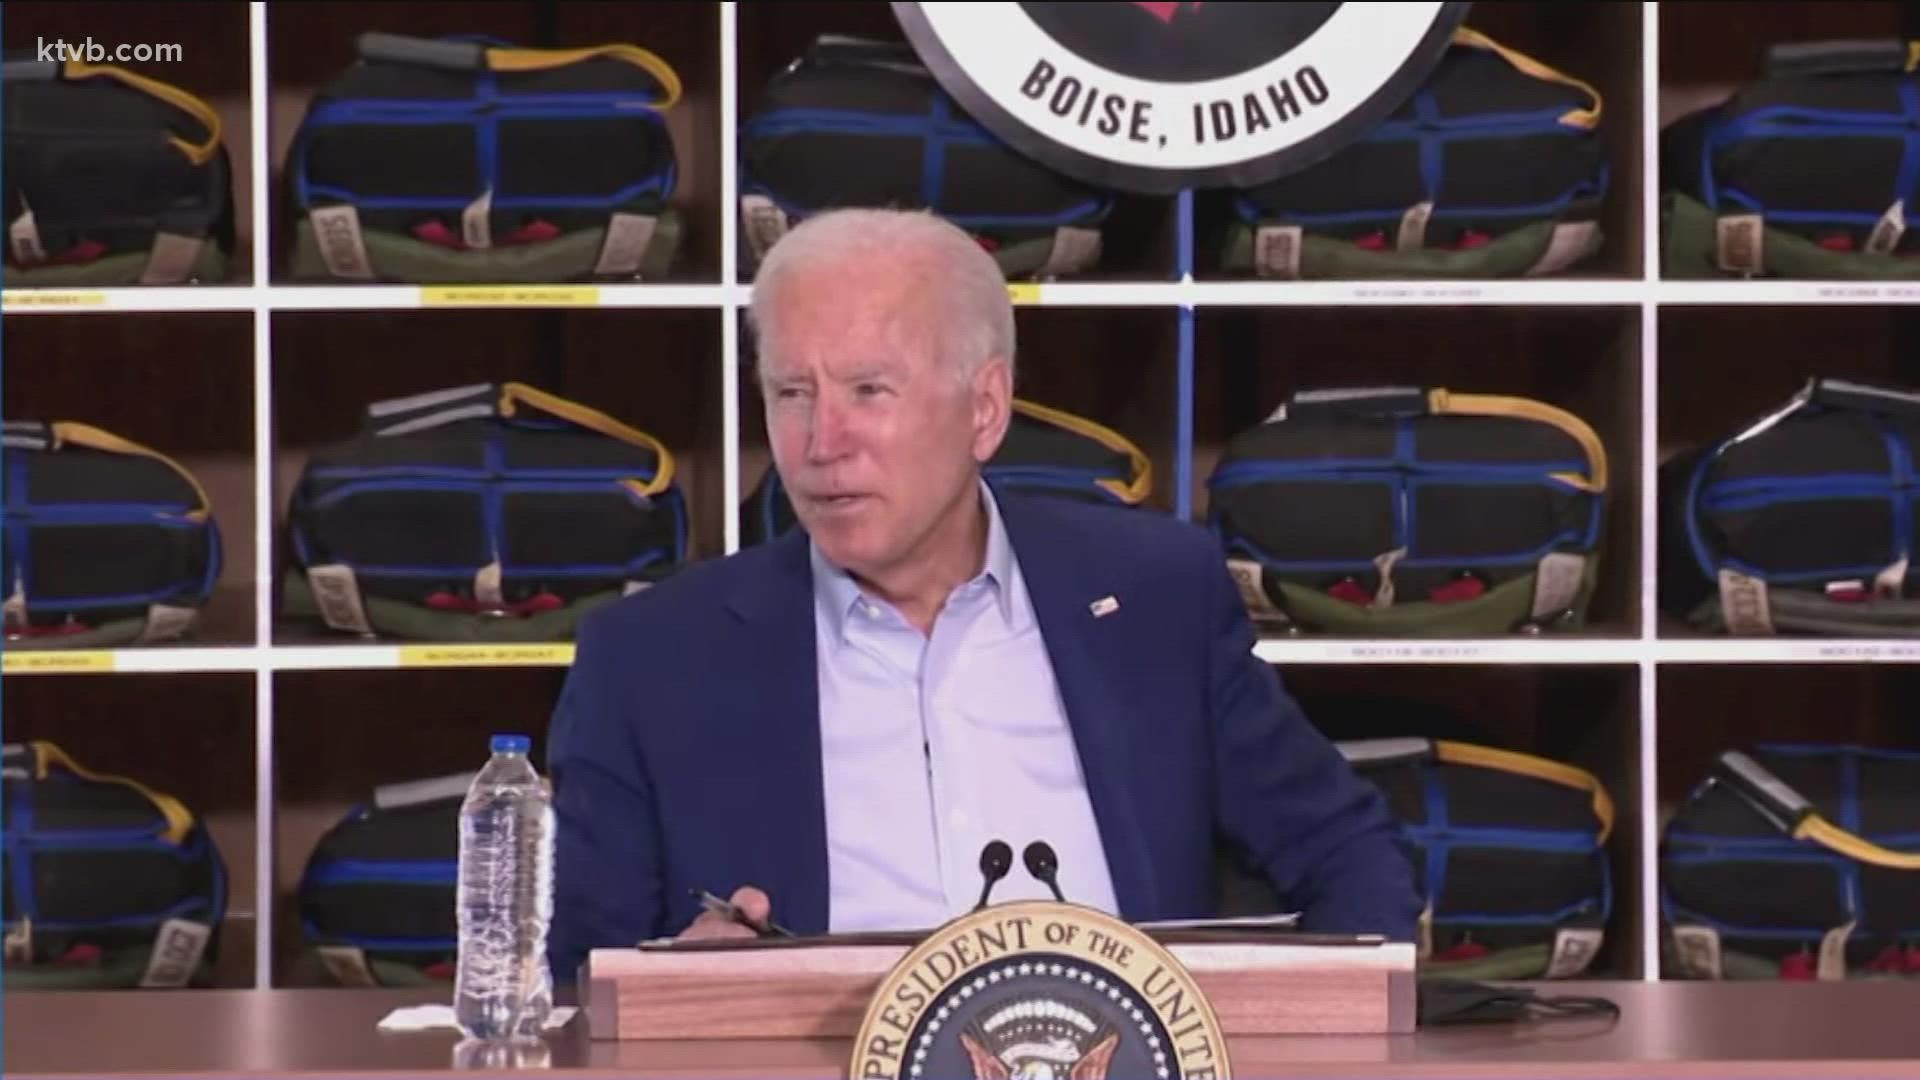 Biden was very serious about addressing climate change, he says this is a weather and climate issue not something Republicans and Democrats need to argue about.